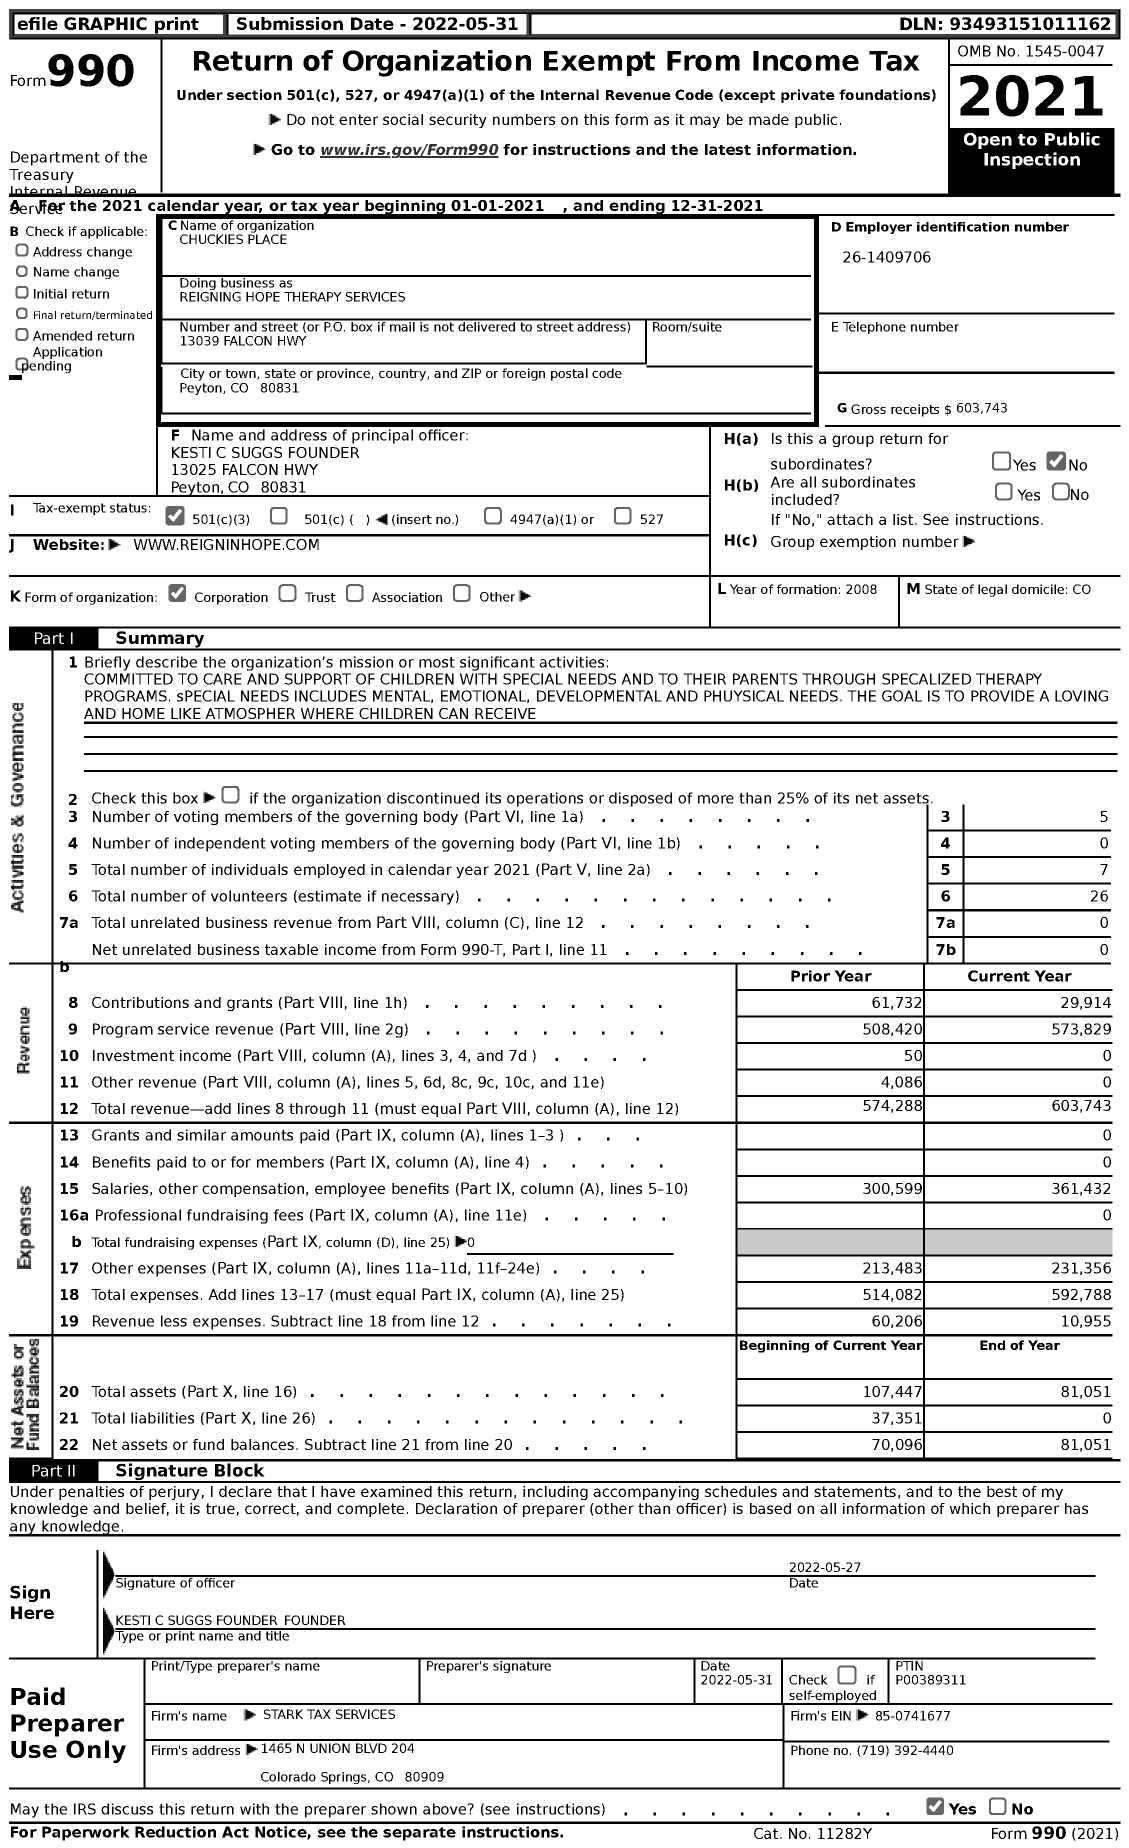 Image of first page of 2021 Form 990 for Reigning Hope Therapy Services